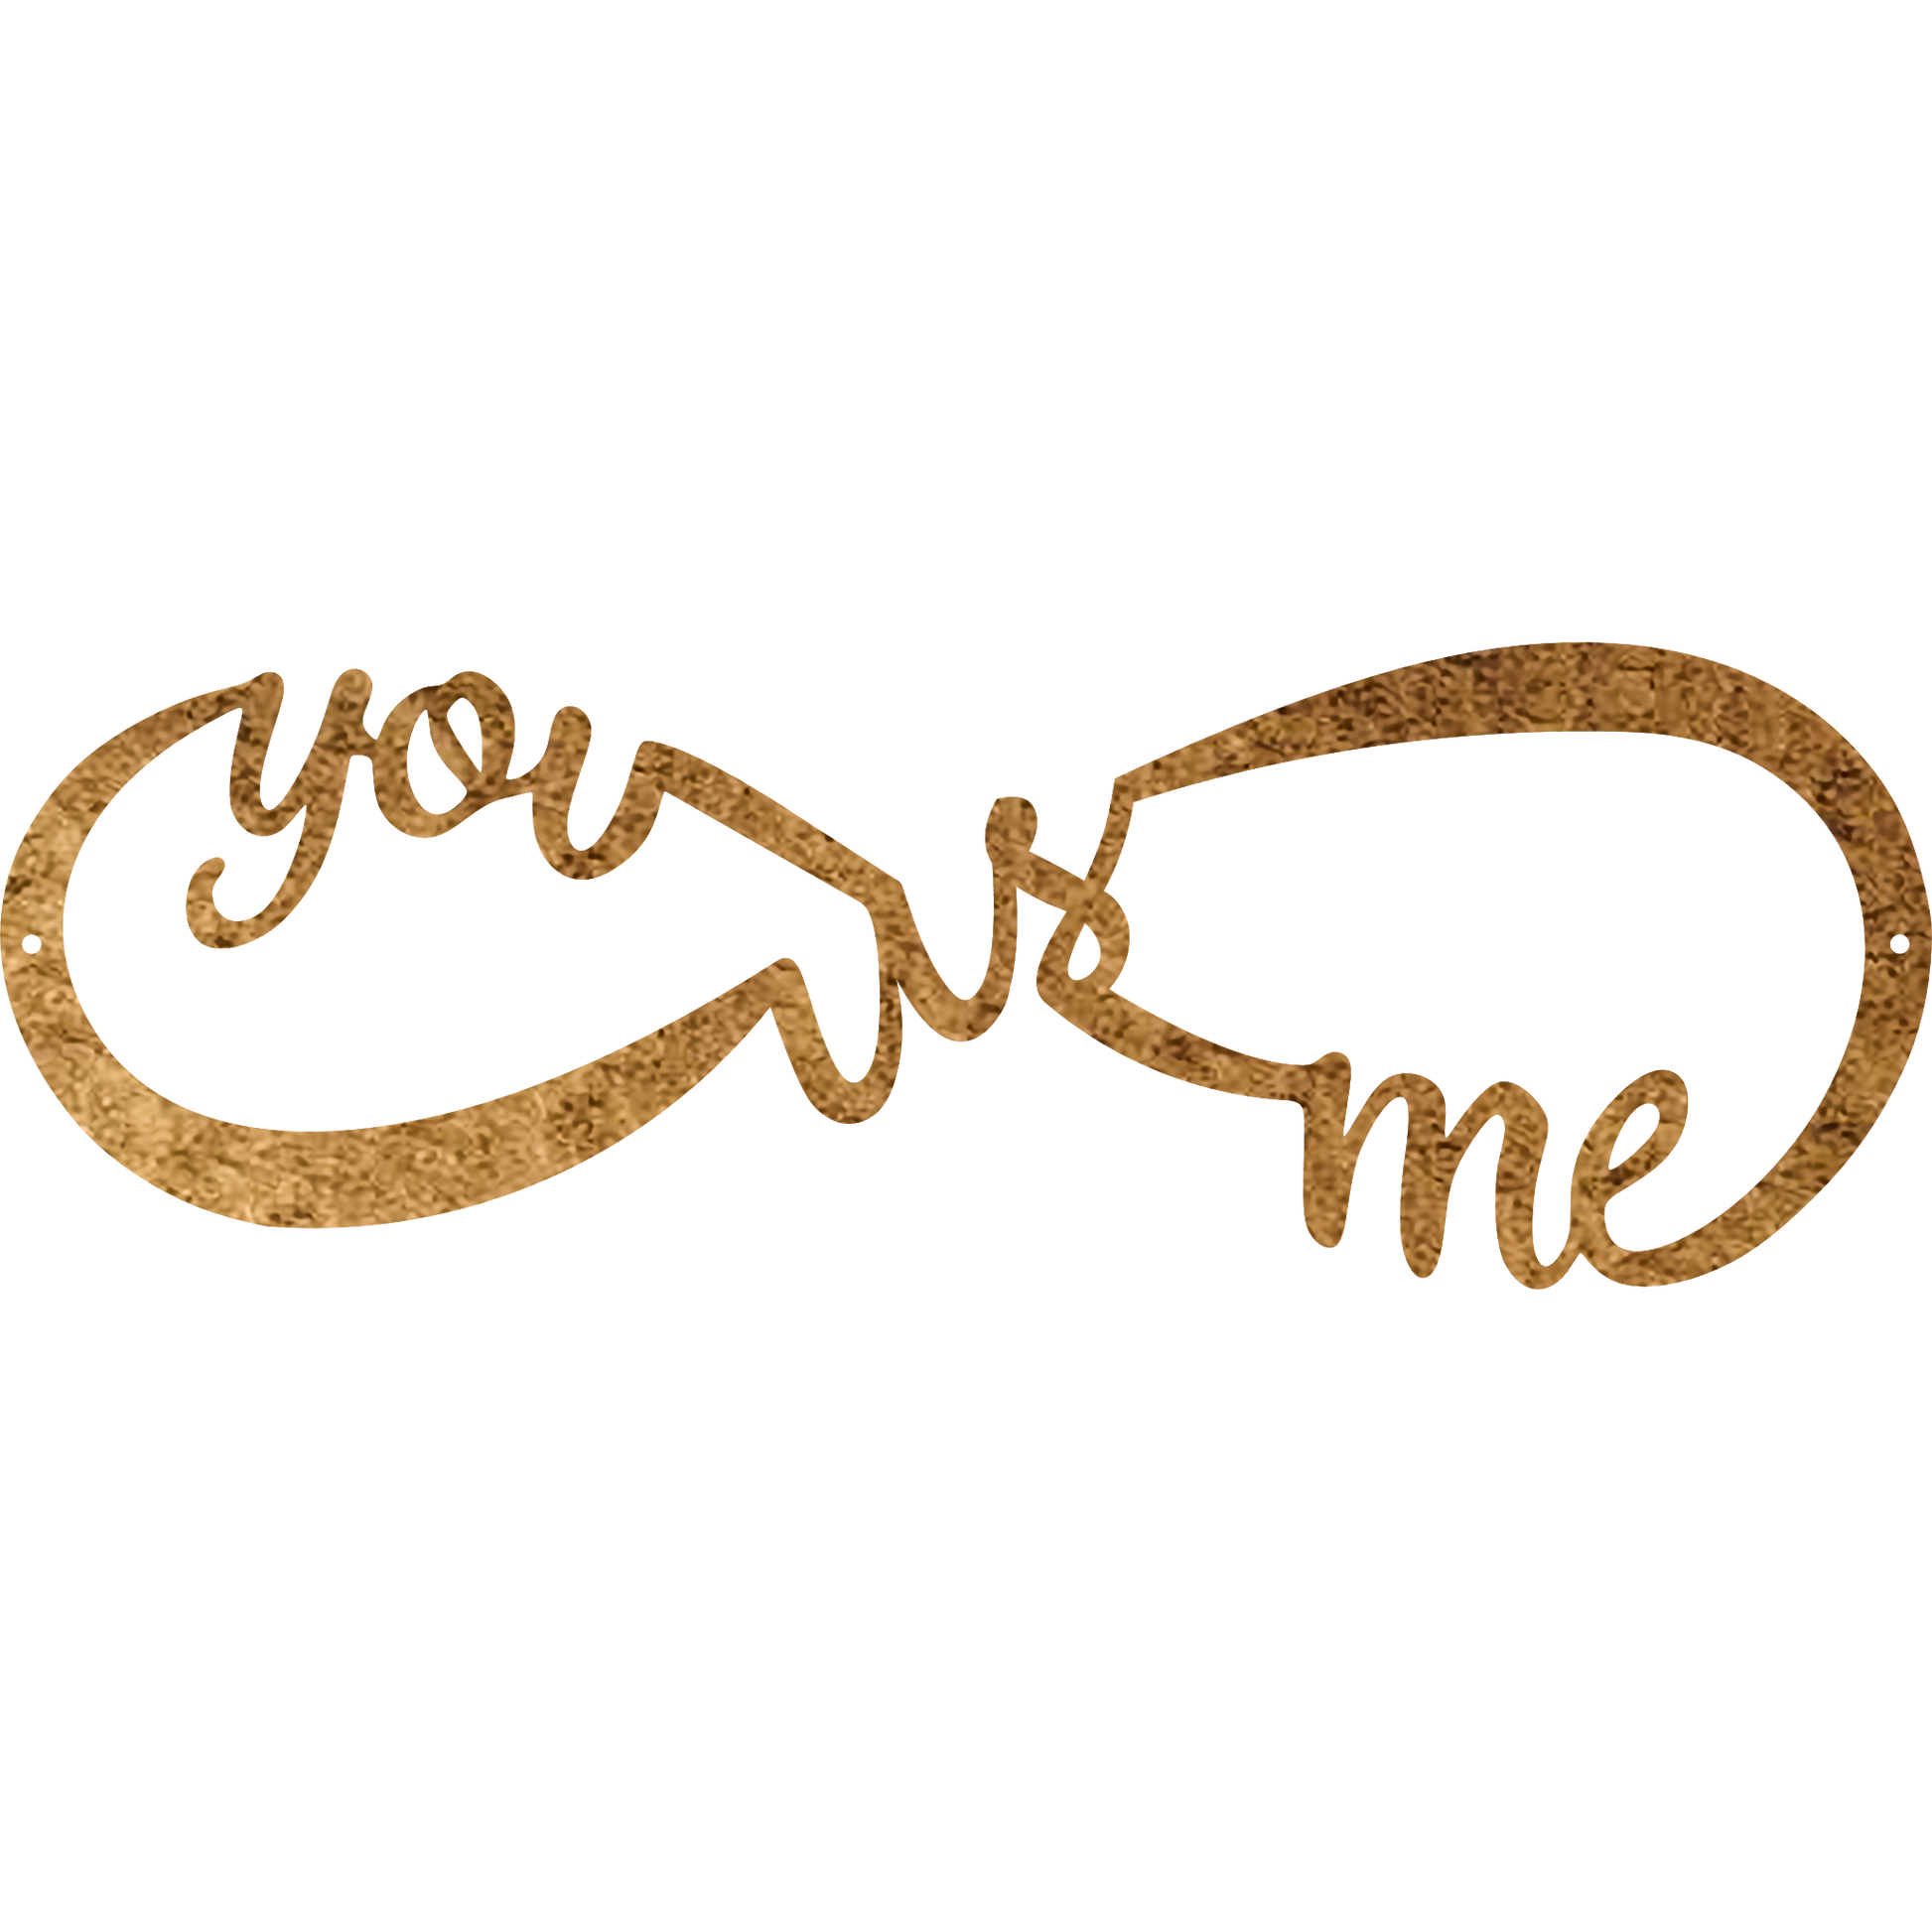 You Me and US Infinity - Metal Wall Art Hammer Copper - Badger Steel USA